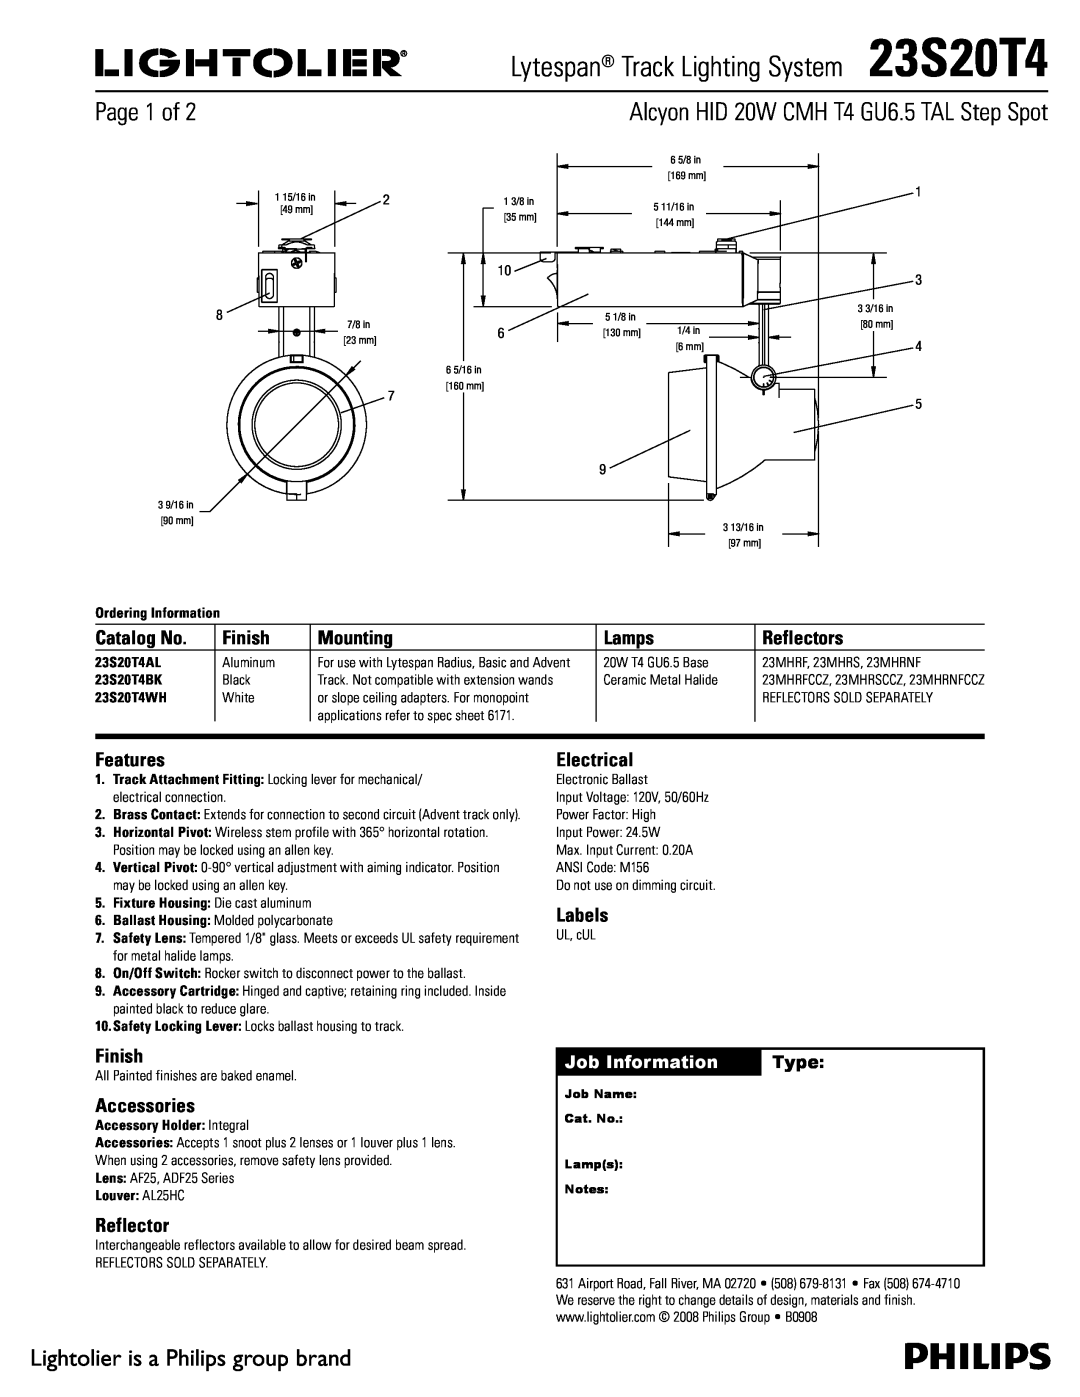 Lightolier manual Lytespan Track Lighting System23S20T4, Lightolier is a Philips group brand, Page 1 of, Catalog No 